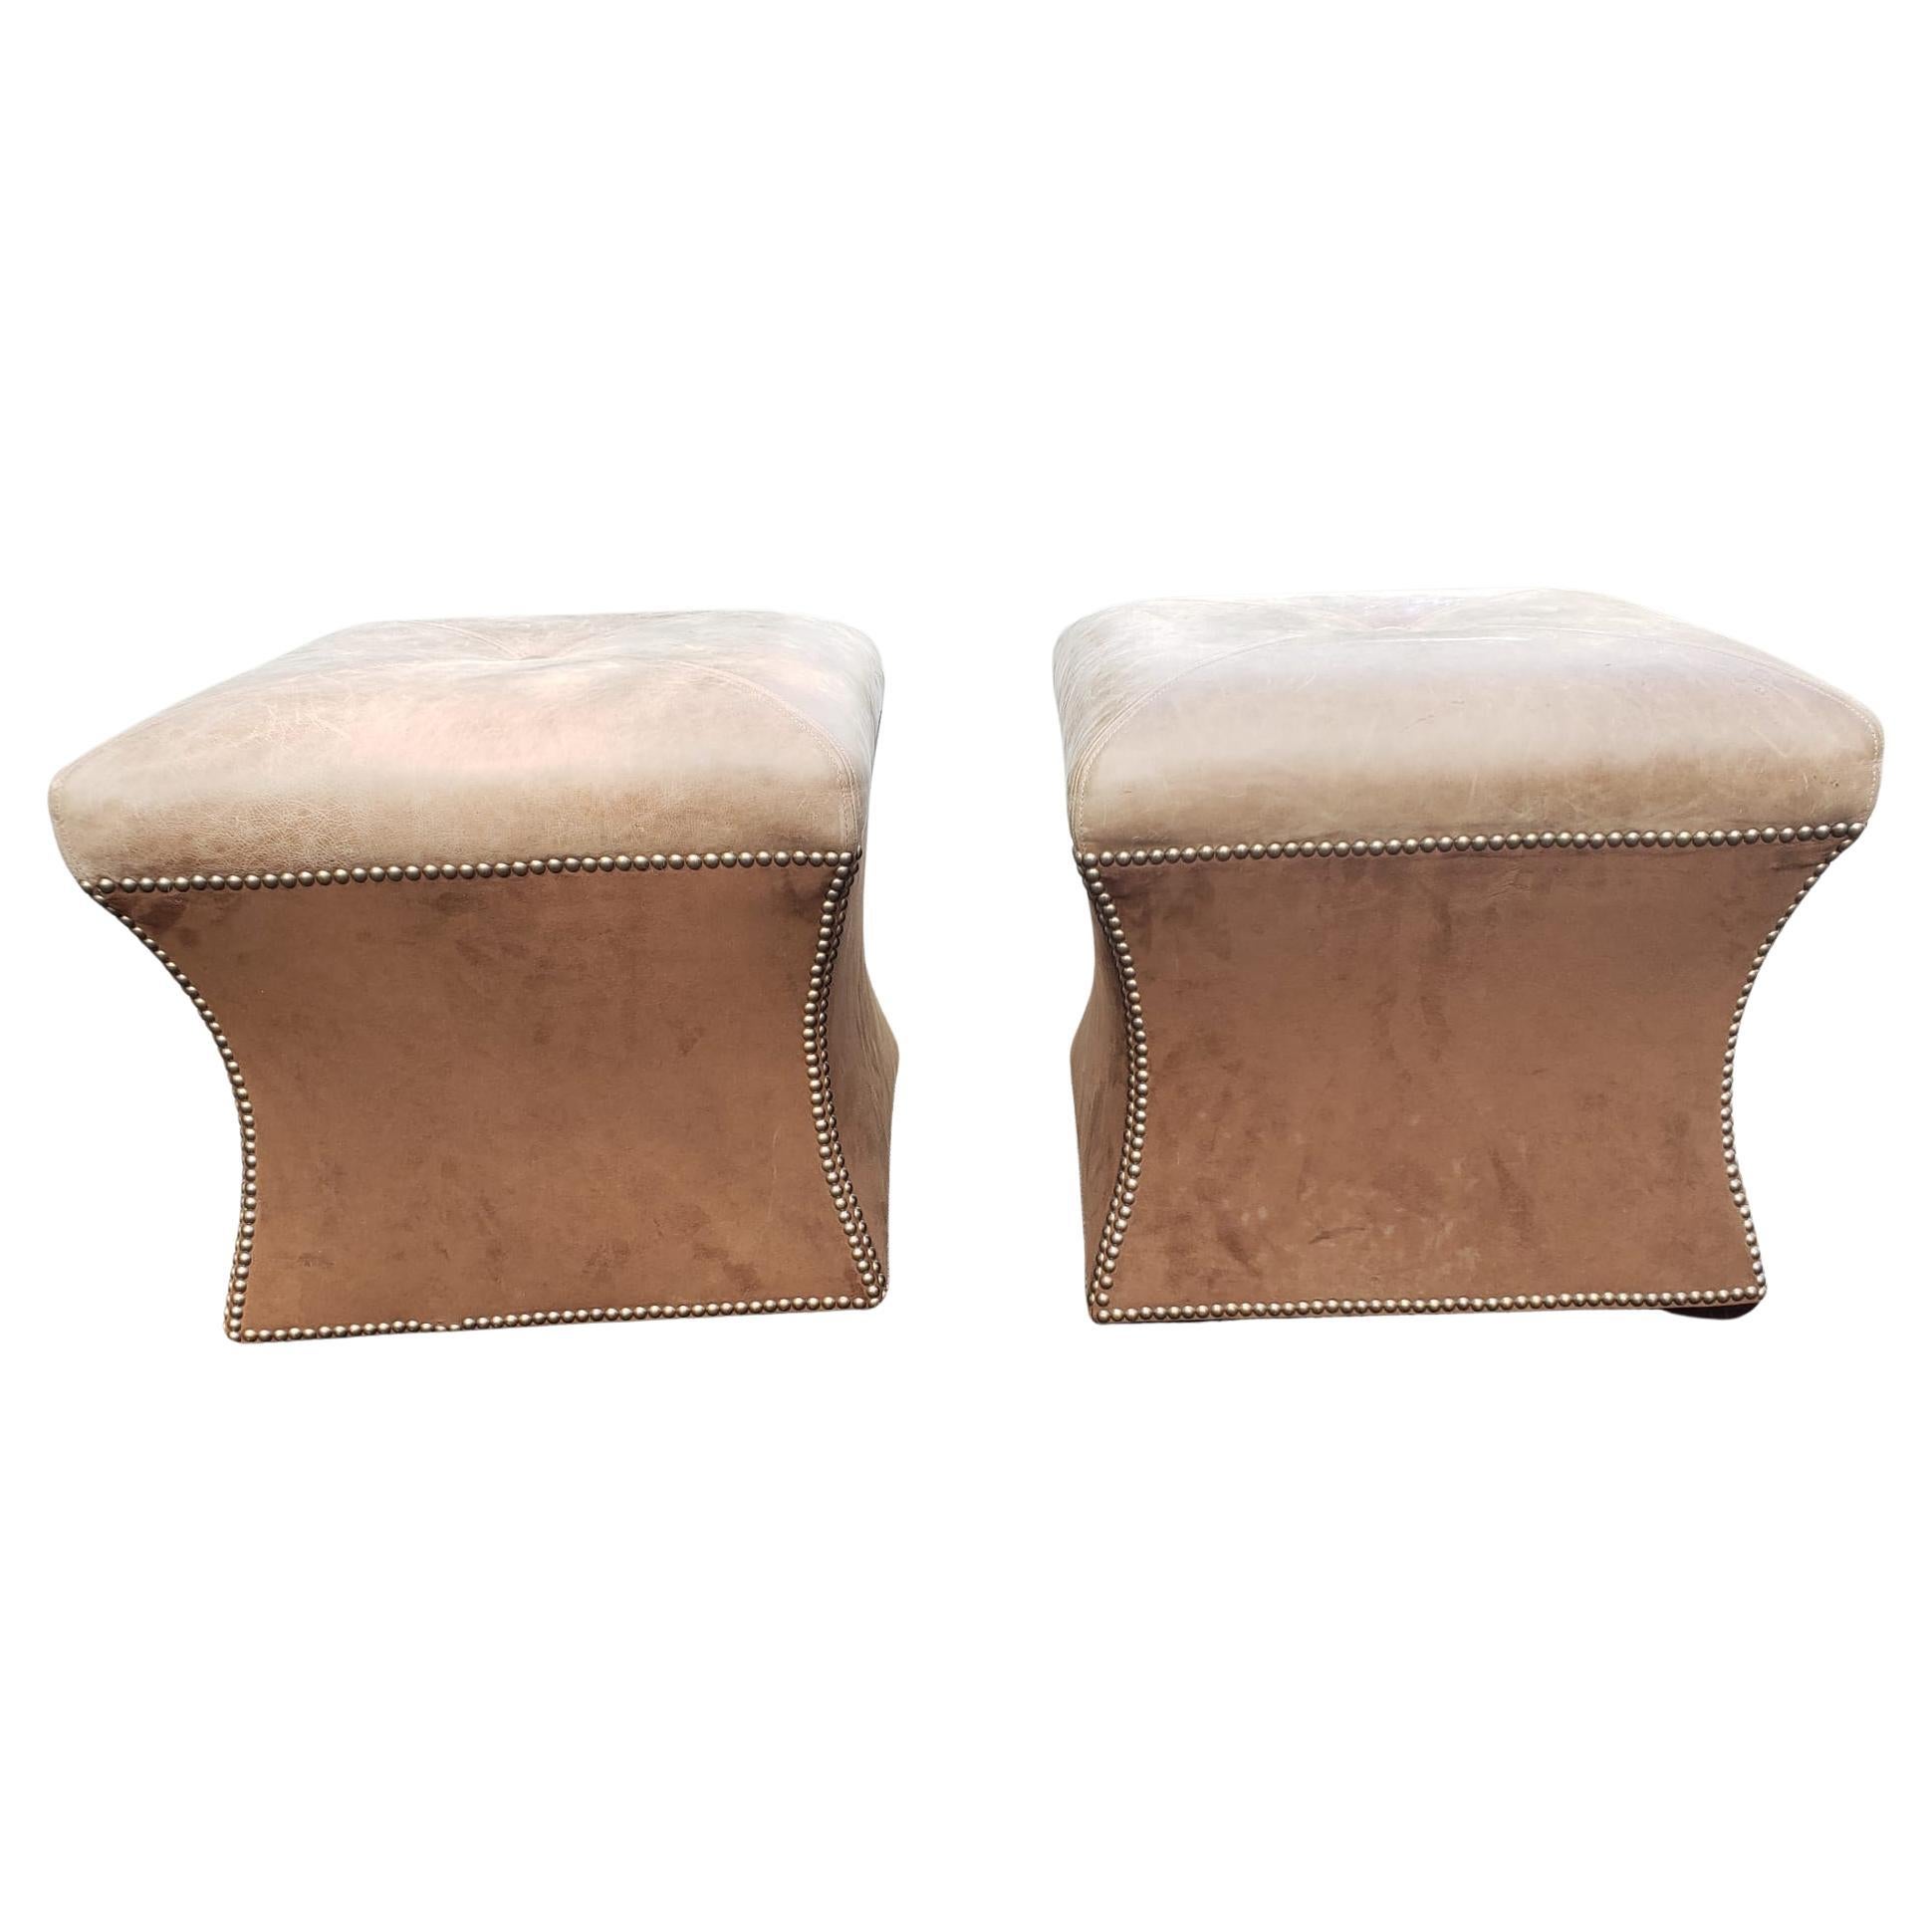 Pair Rustic Full Grain Leather Upholstered Ottoman Stools with Nailhead Trims 